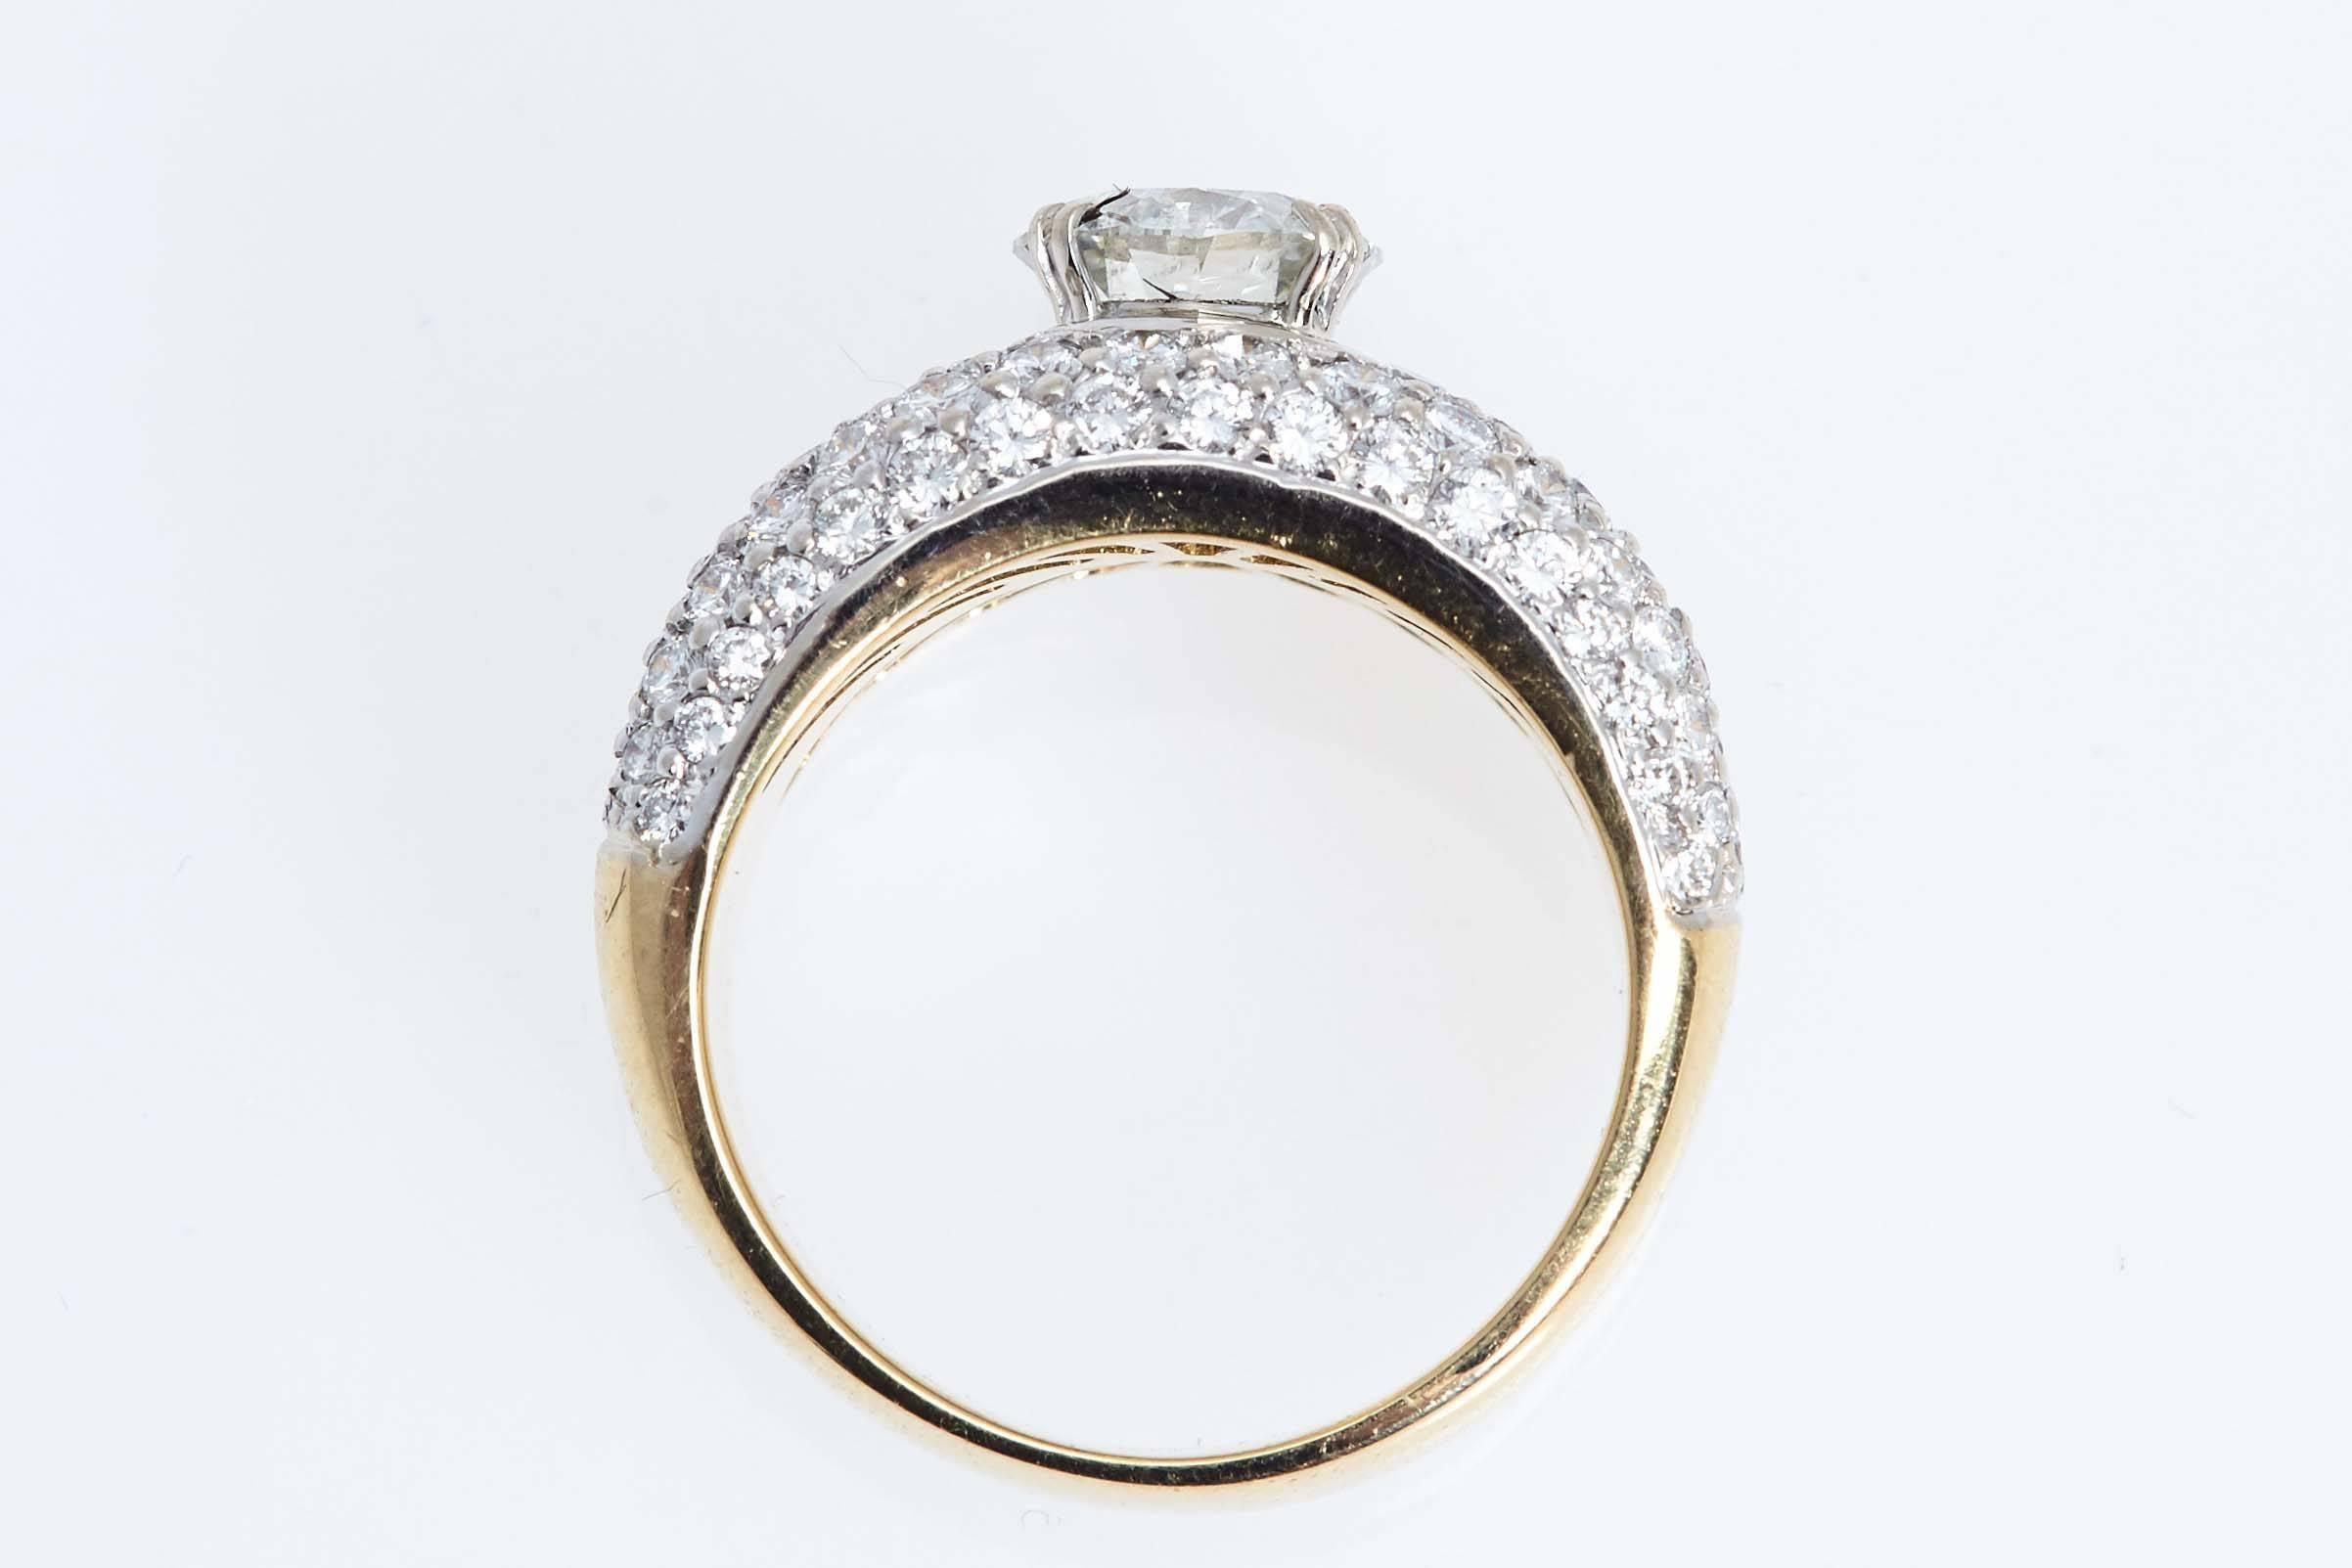 Eighteen karat white and yellow gold diamond ring. The ring looks as if you have two bands of diamonds with a round diamond in the center weighing 1.41 carats.  There are 118 smaller diamonds weighing approximately 2.00 carats set into the bands.